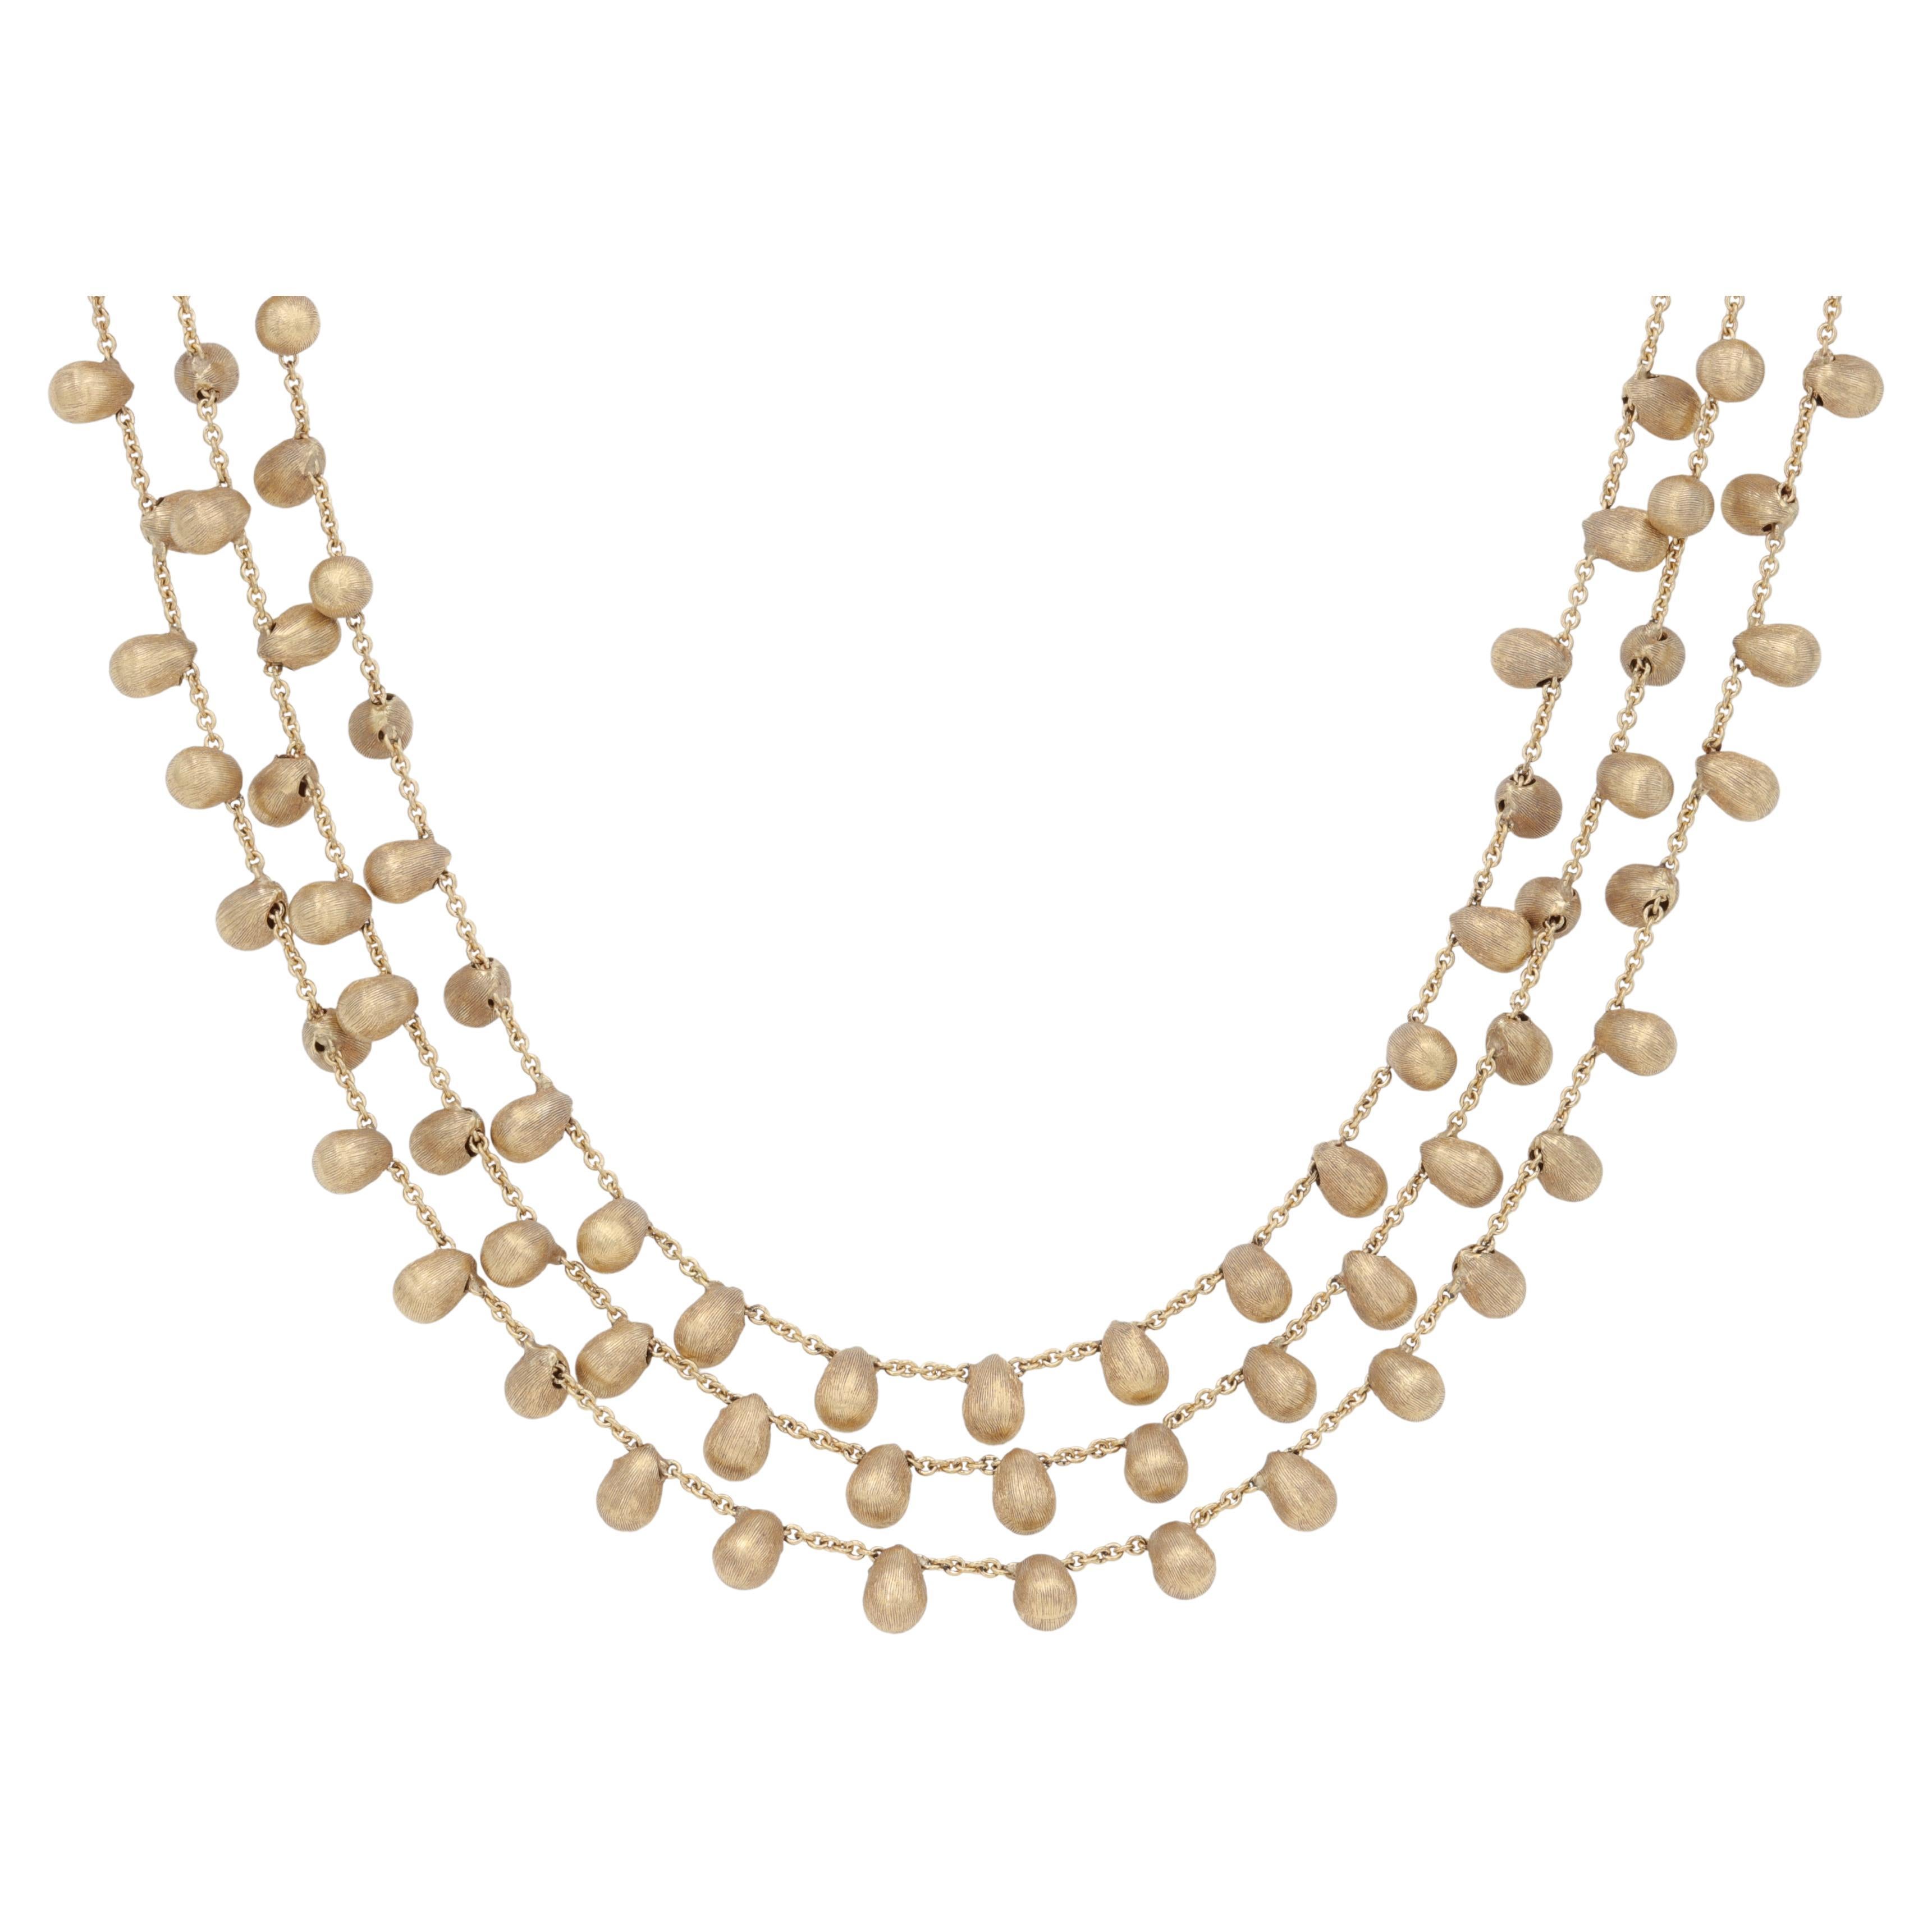 Marco Bicego 3 Strand Acapulco Necklace 18 Karat Yellow Gold For Sale